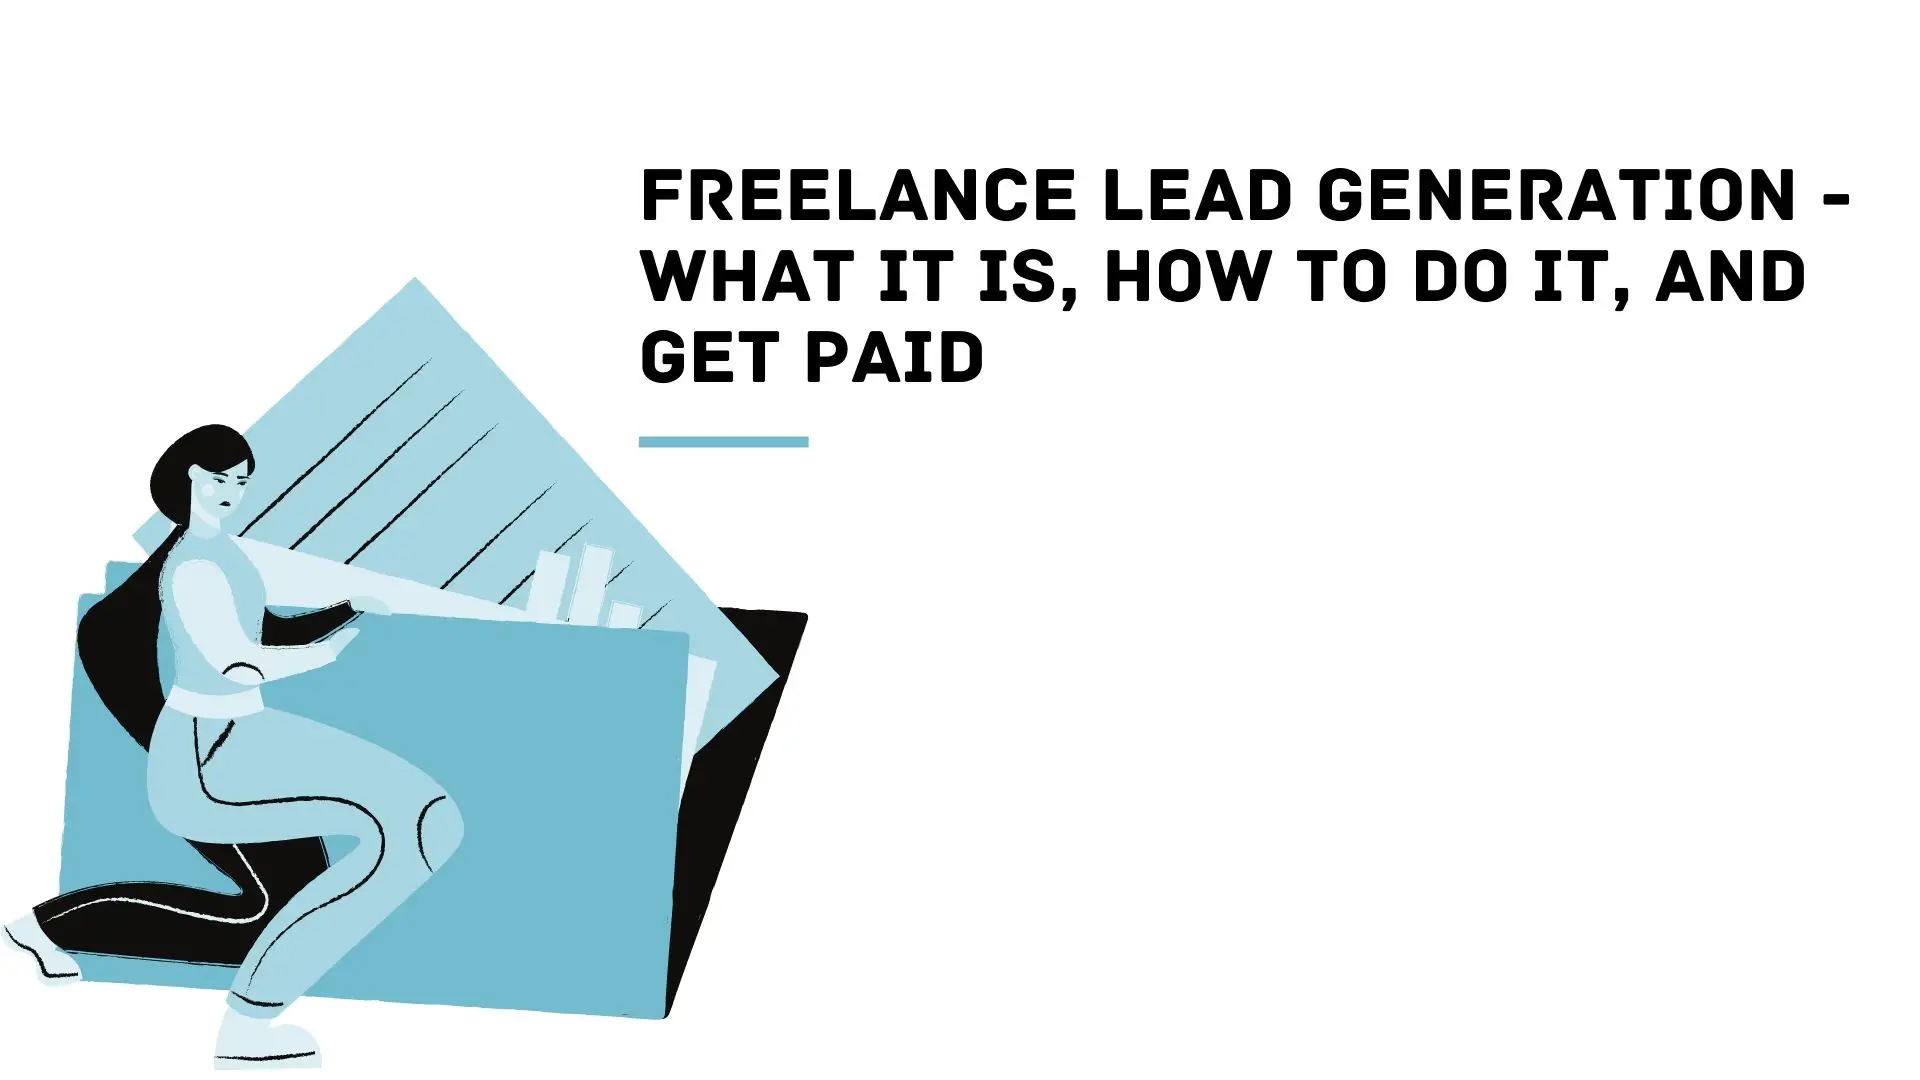 Freelance Lead Generation - What It Is, How To Do It, And Get Paid1